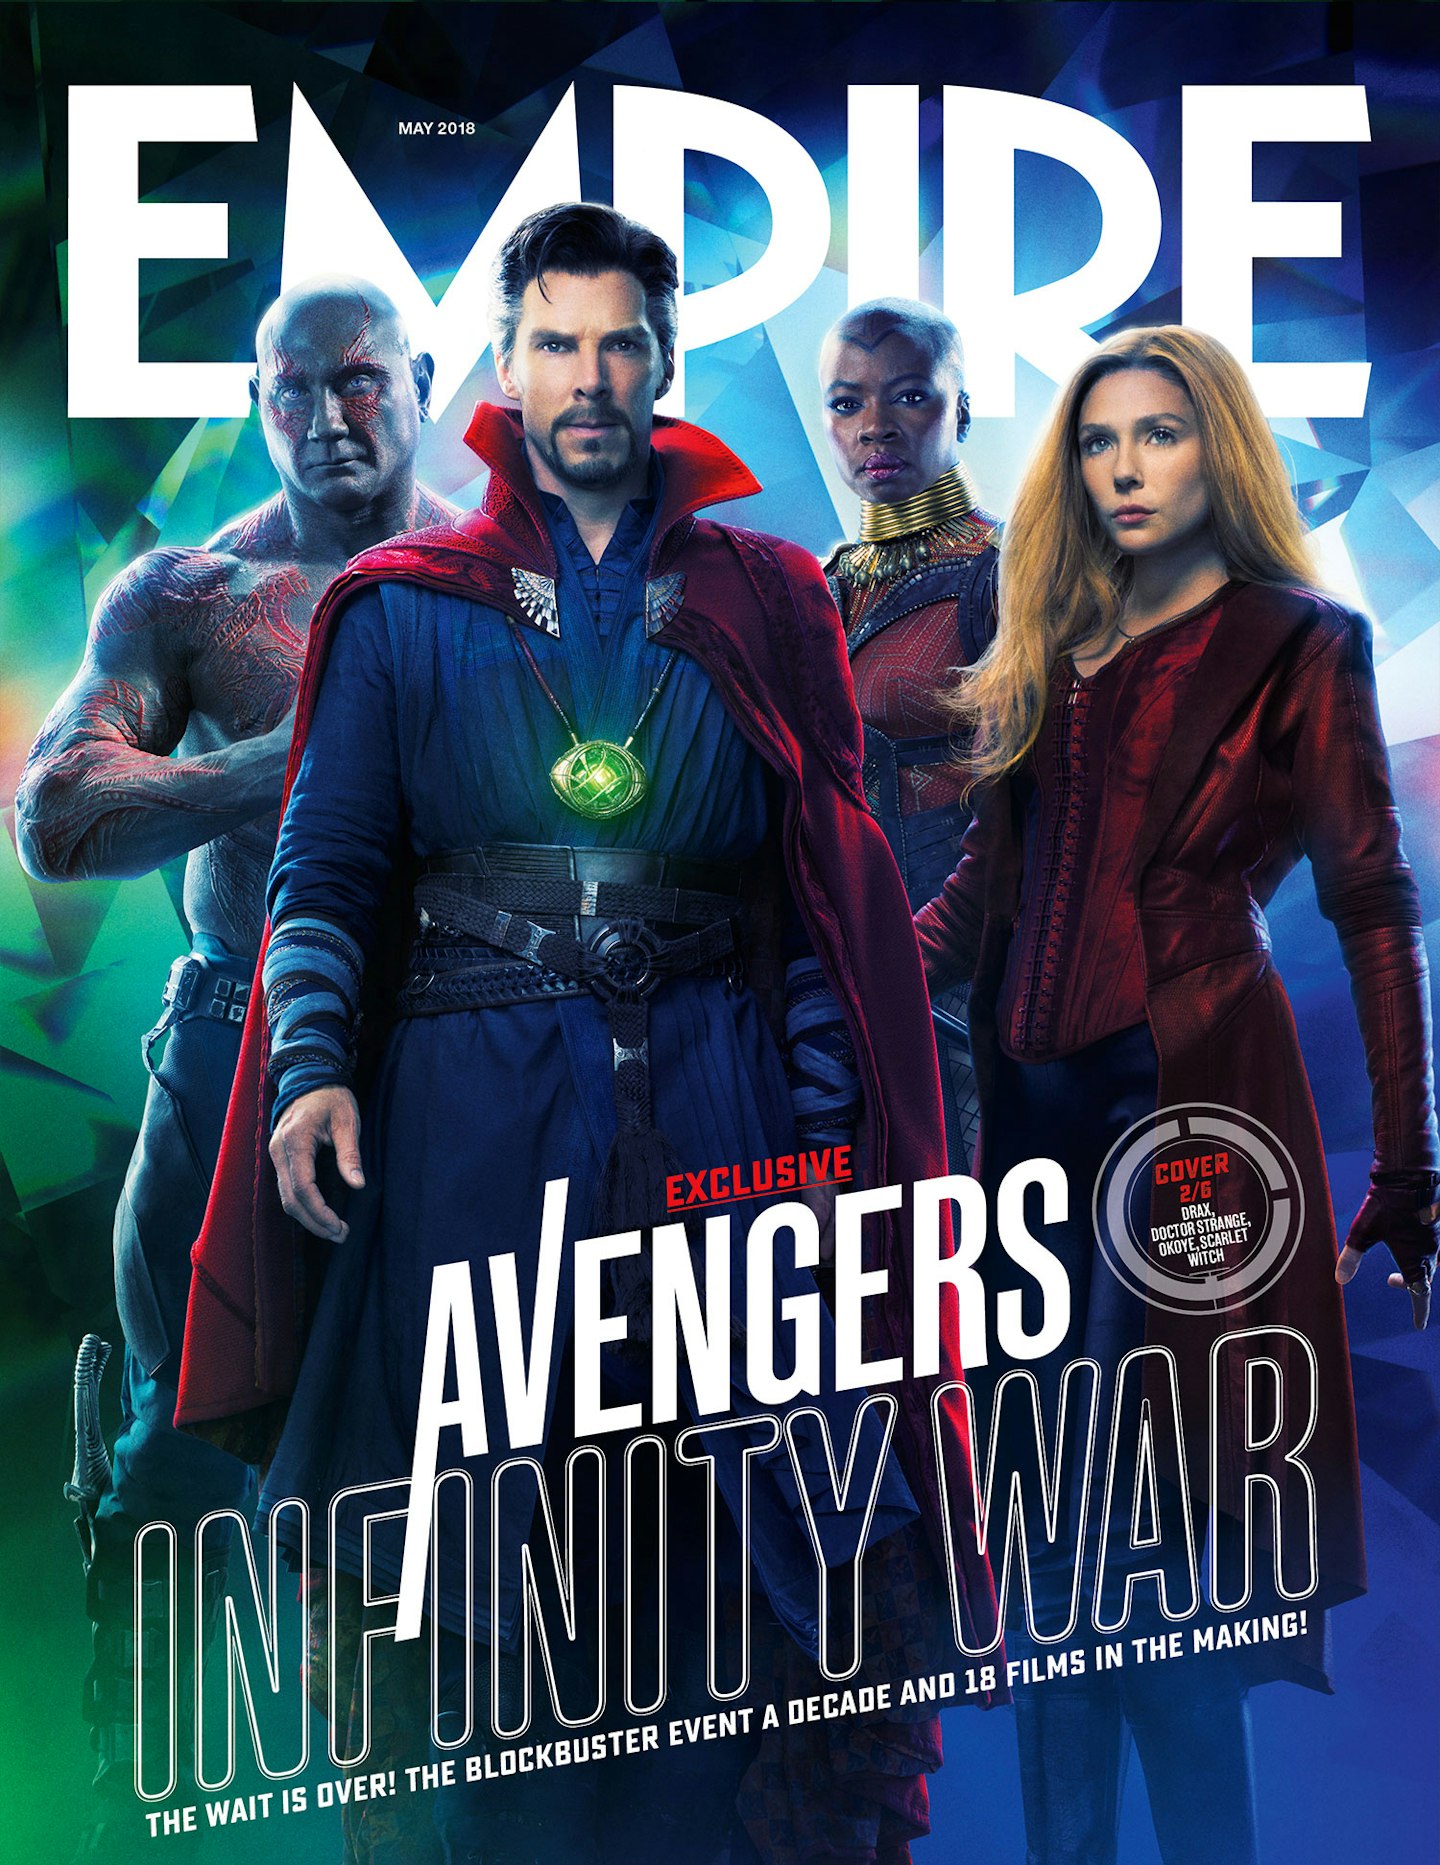 Empire May 2018 - Avengers: Infinity War covers